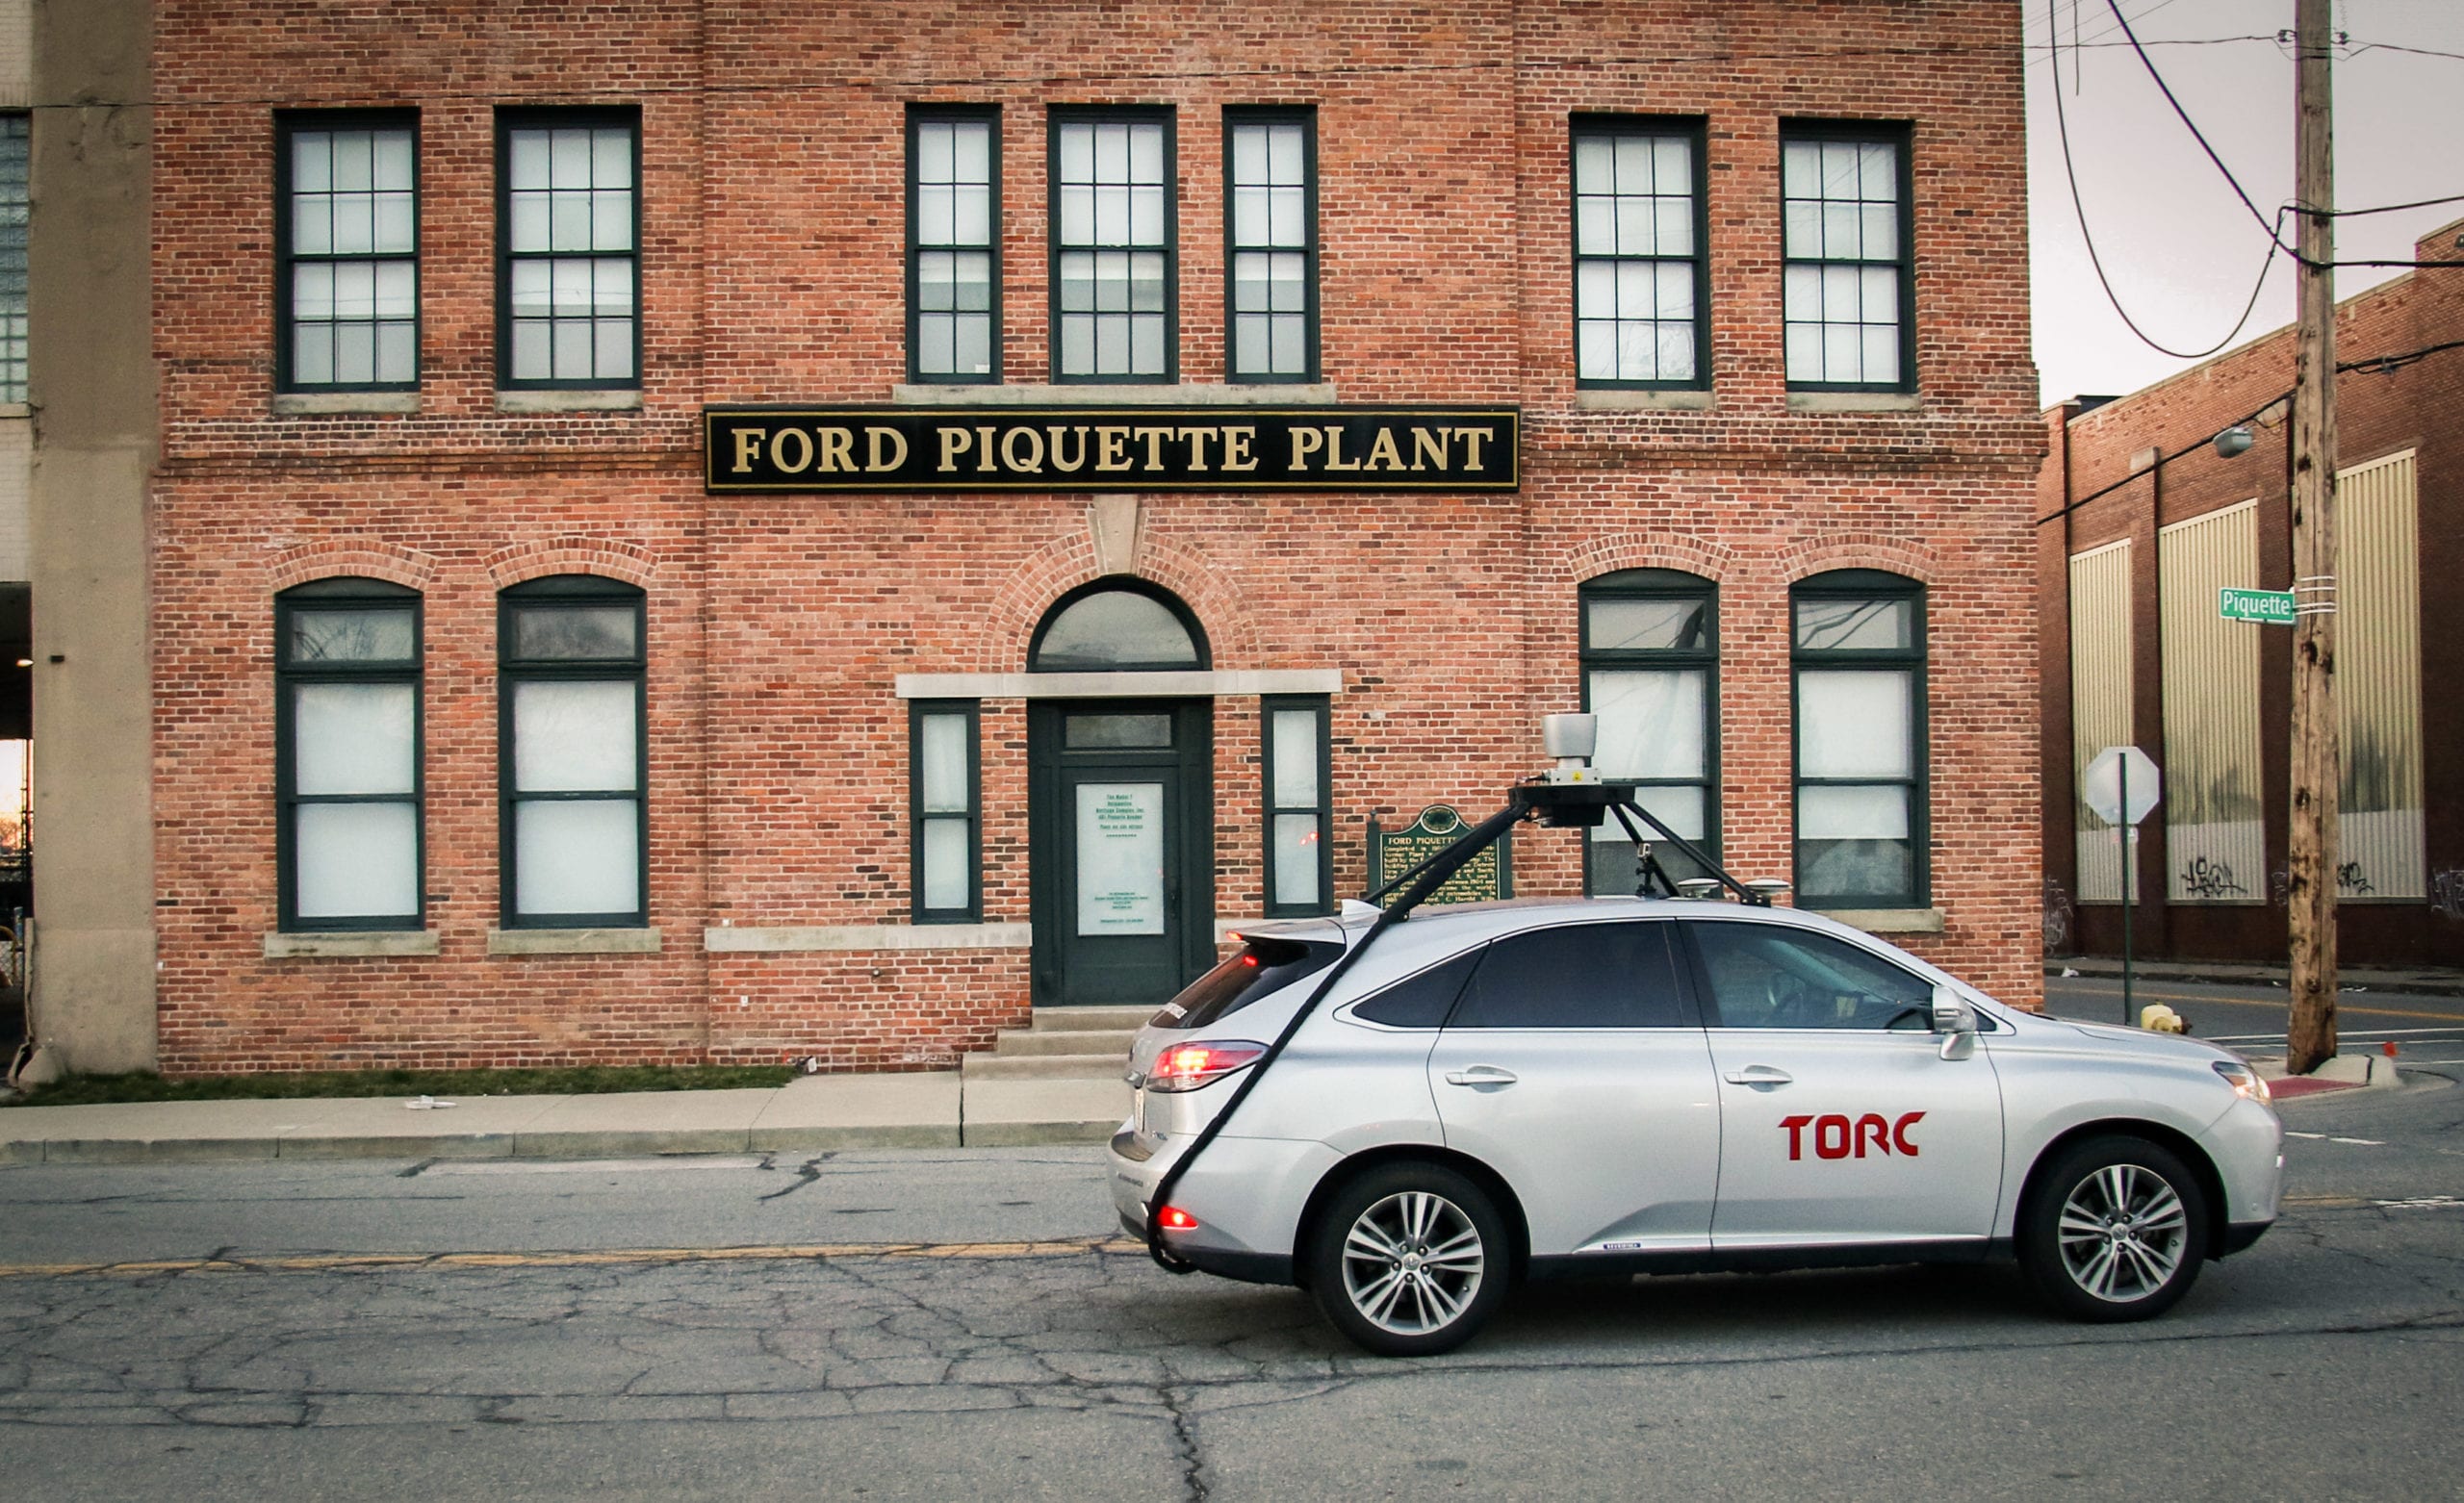 Torc’s self-driving vehicle in front of the Ford Piquette Avenue Plant on April 1, 2017.